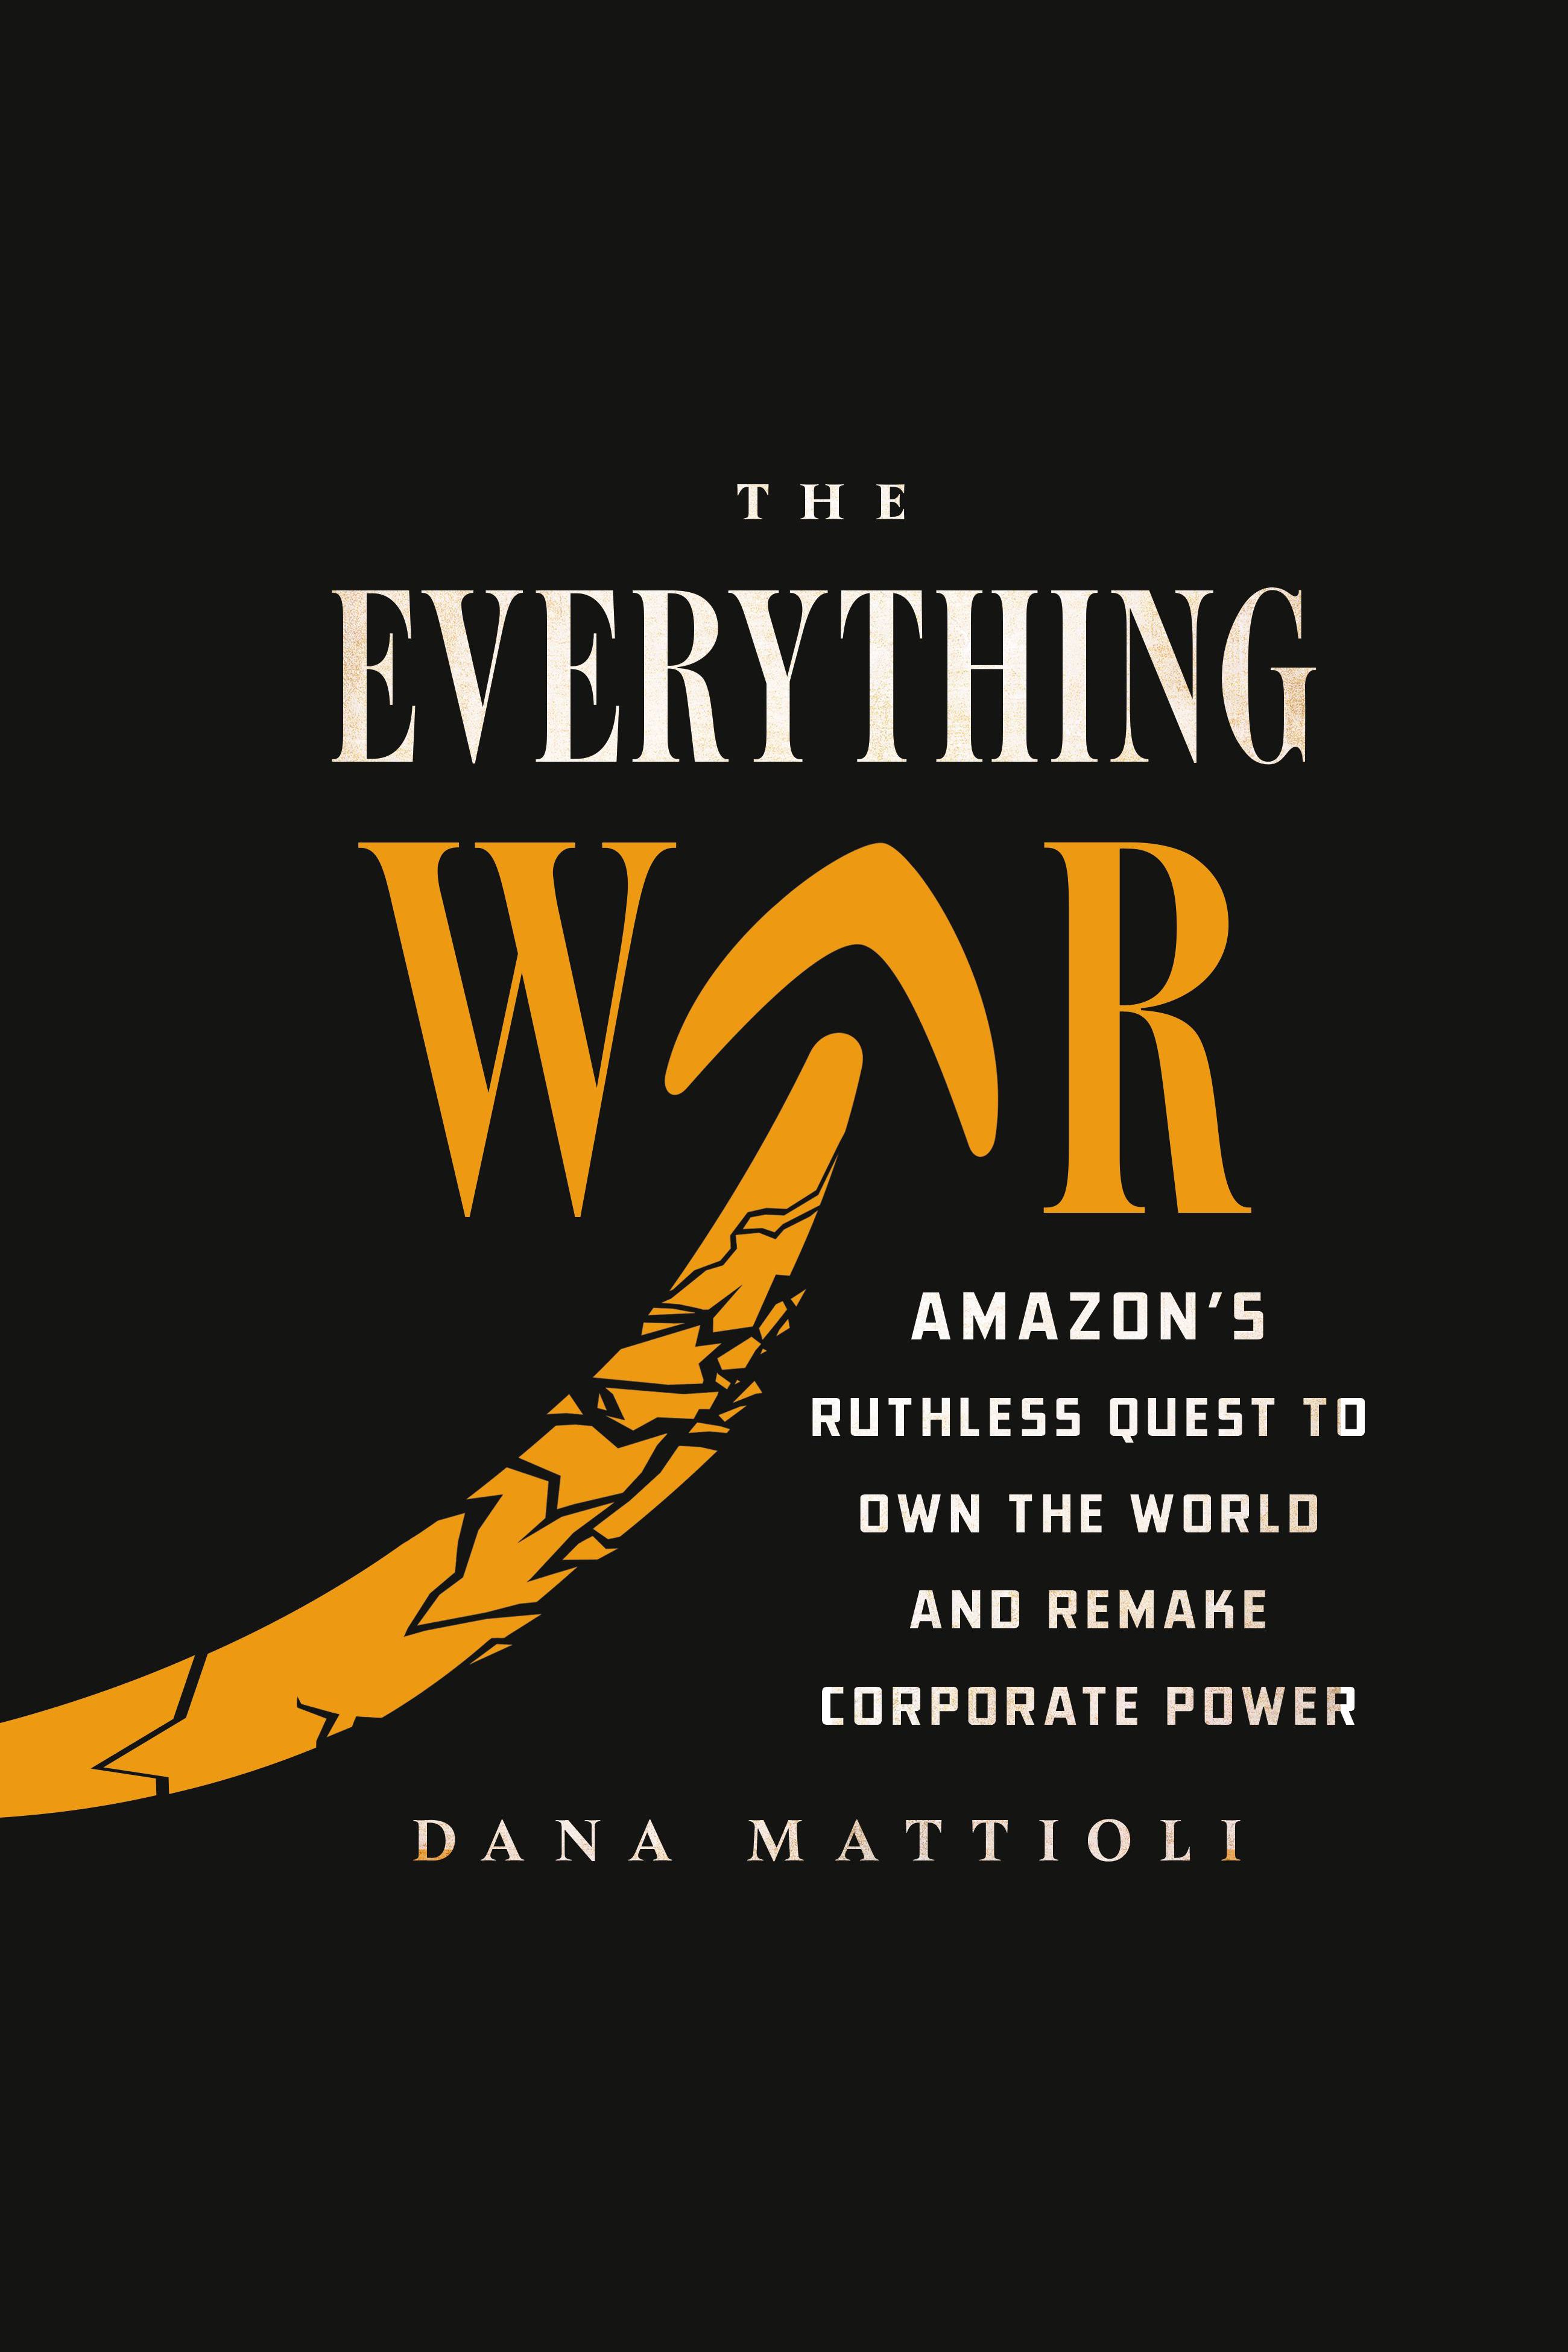 The Everything War Amazon's Ruthless Quest to Own the World and Remake Corporate Power cover image